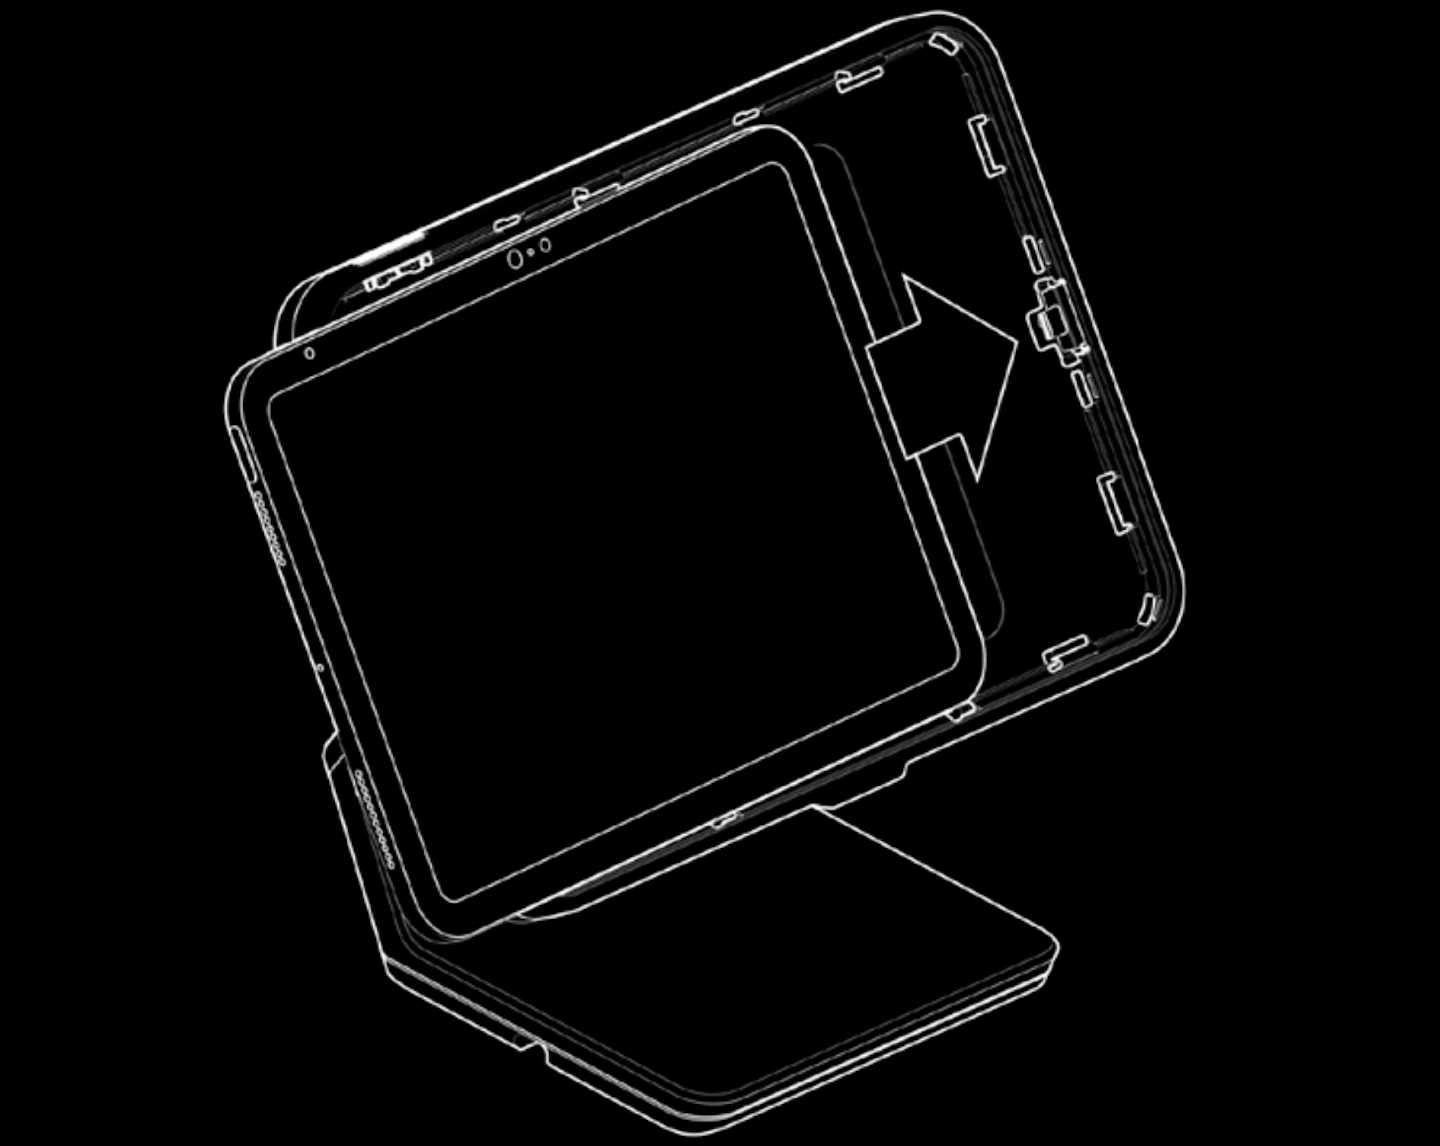 Illustration of Lightspeed Stand with iPad being placed. An arrow is pointing to show the iPad being slid into the stand towards the right.